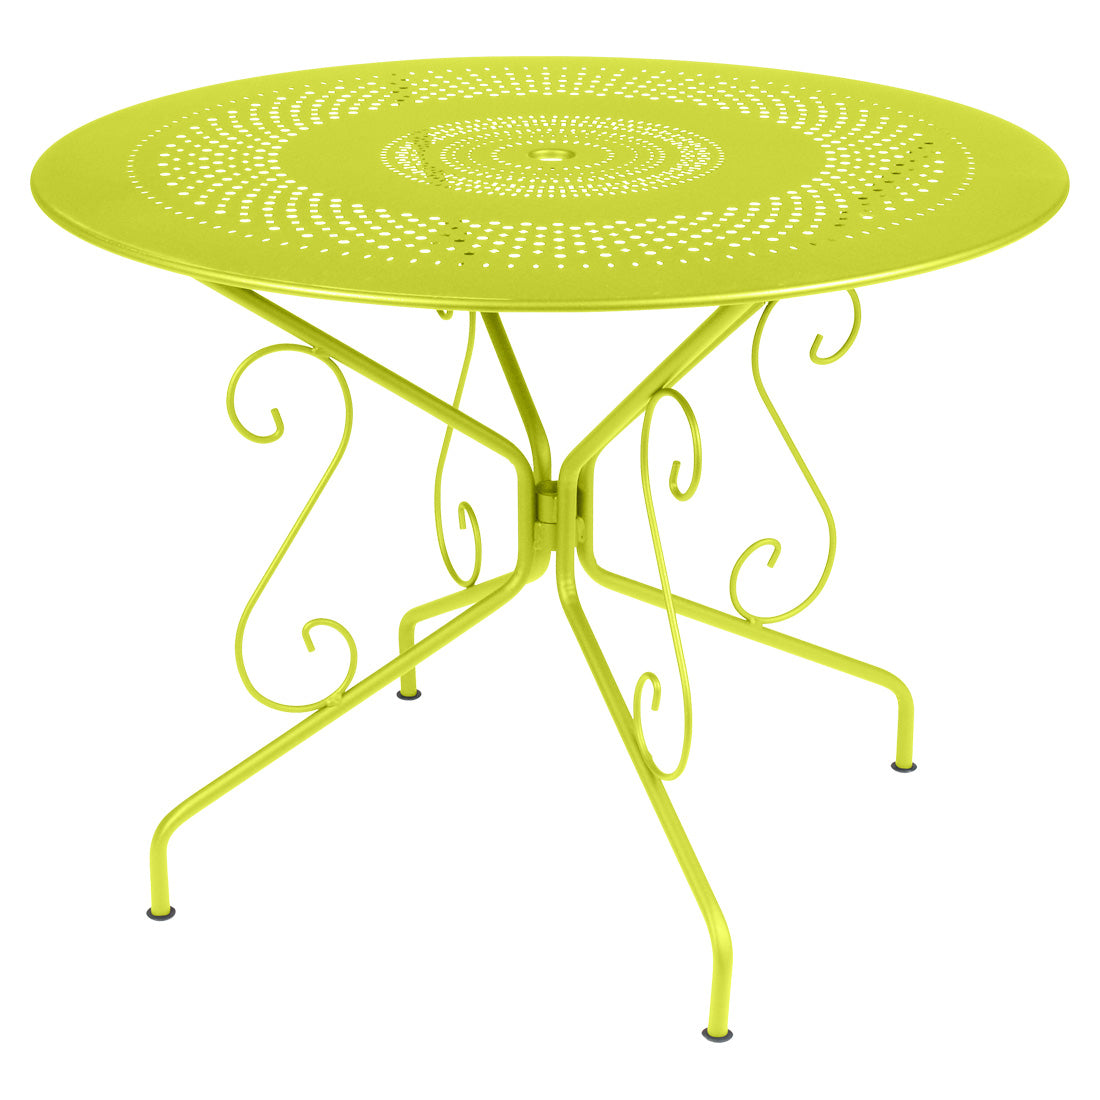 Fermob Montmartre 38 inch Round Dining Table